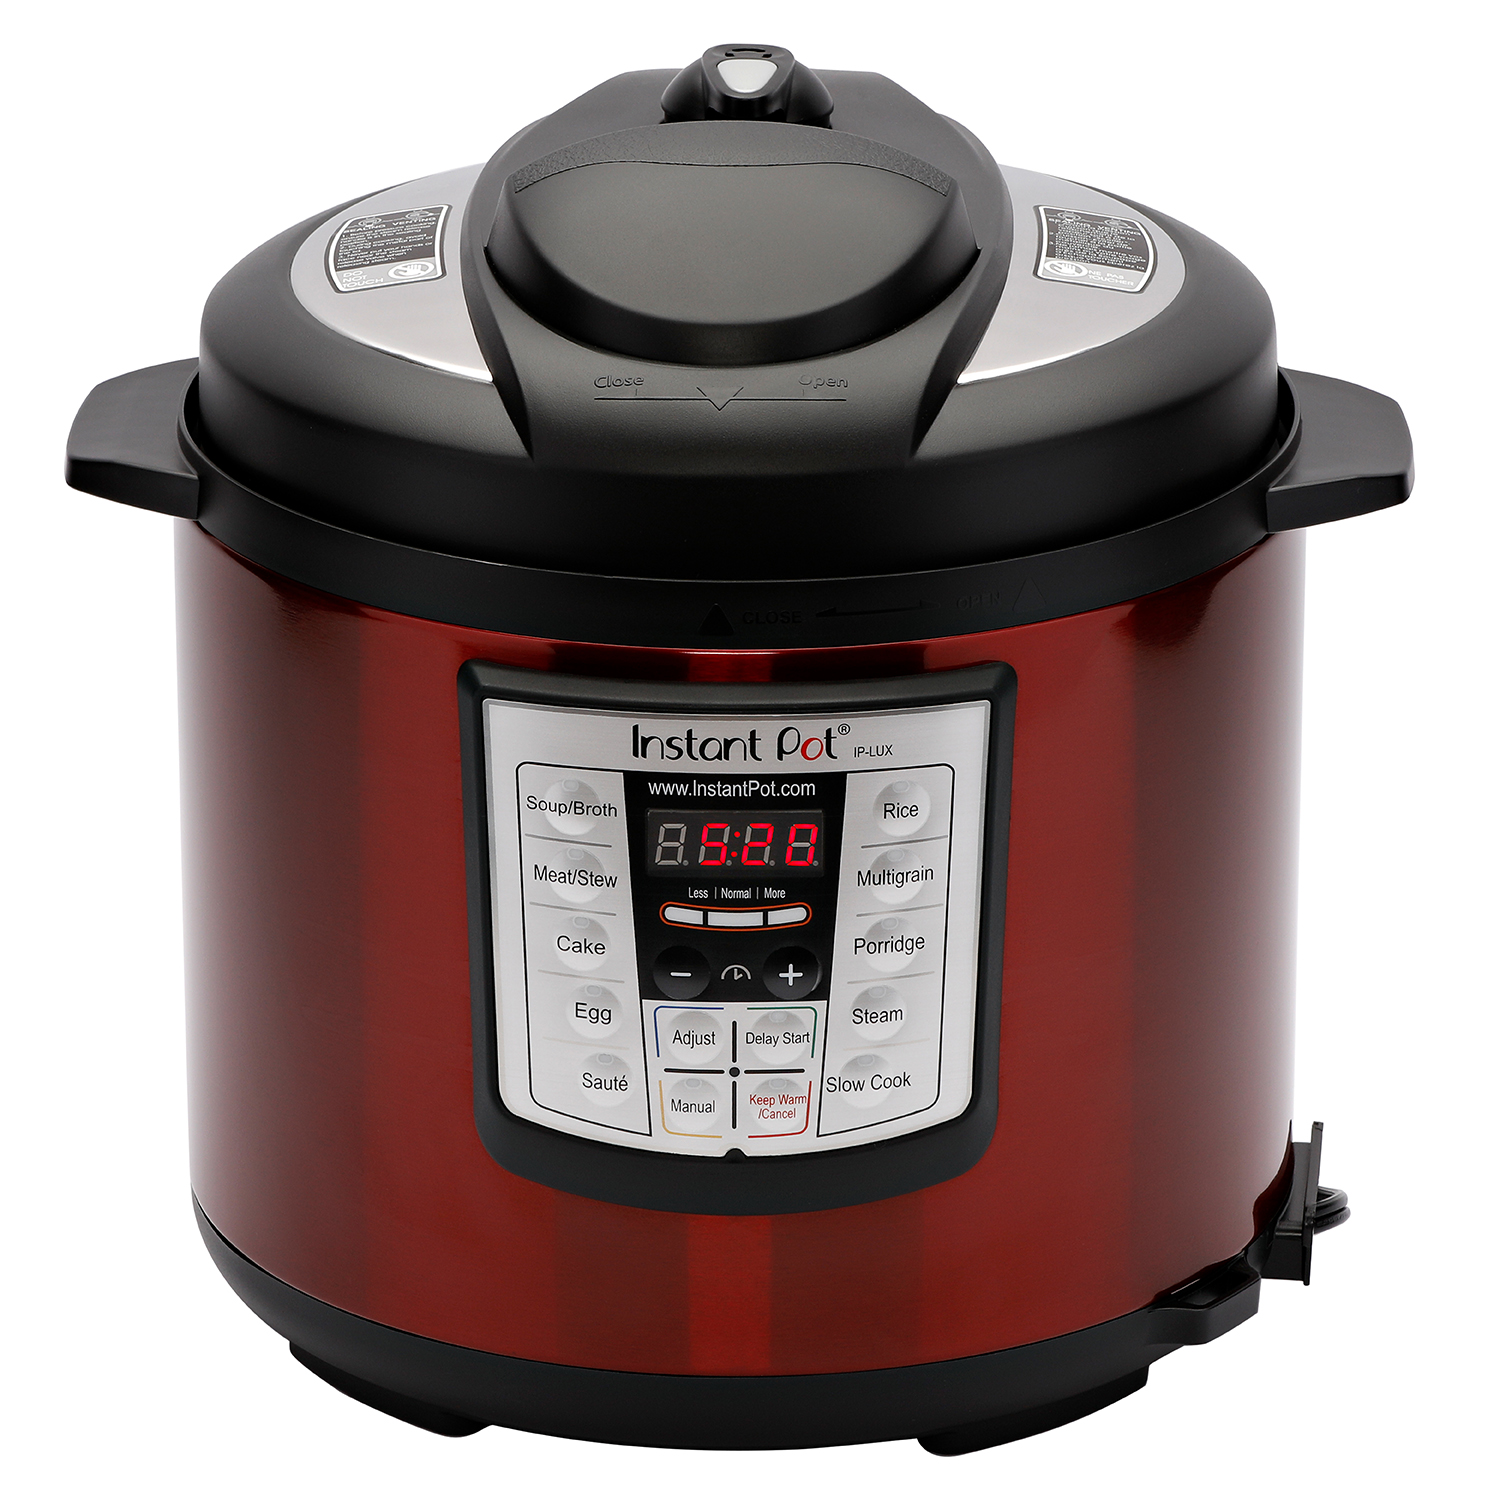 Instant Pot LUX60 Red Stainless Steel 6 Qt 6-in-1 Multi-Use Programmable Pressure Cooker, Slow Cooker, Rice Cooker, Saute, Steamer, and Warmer - image 1 of 8